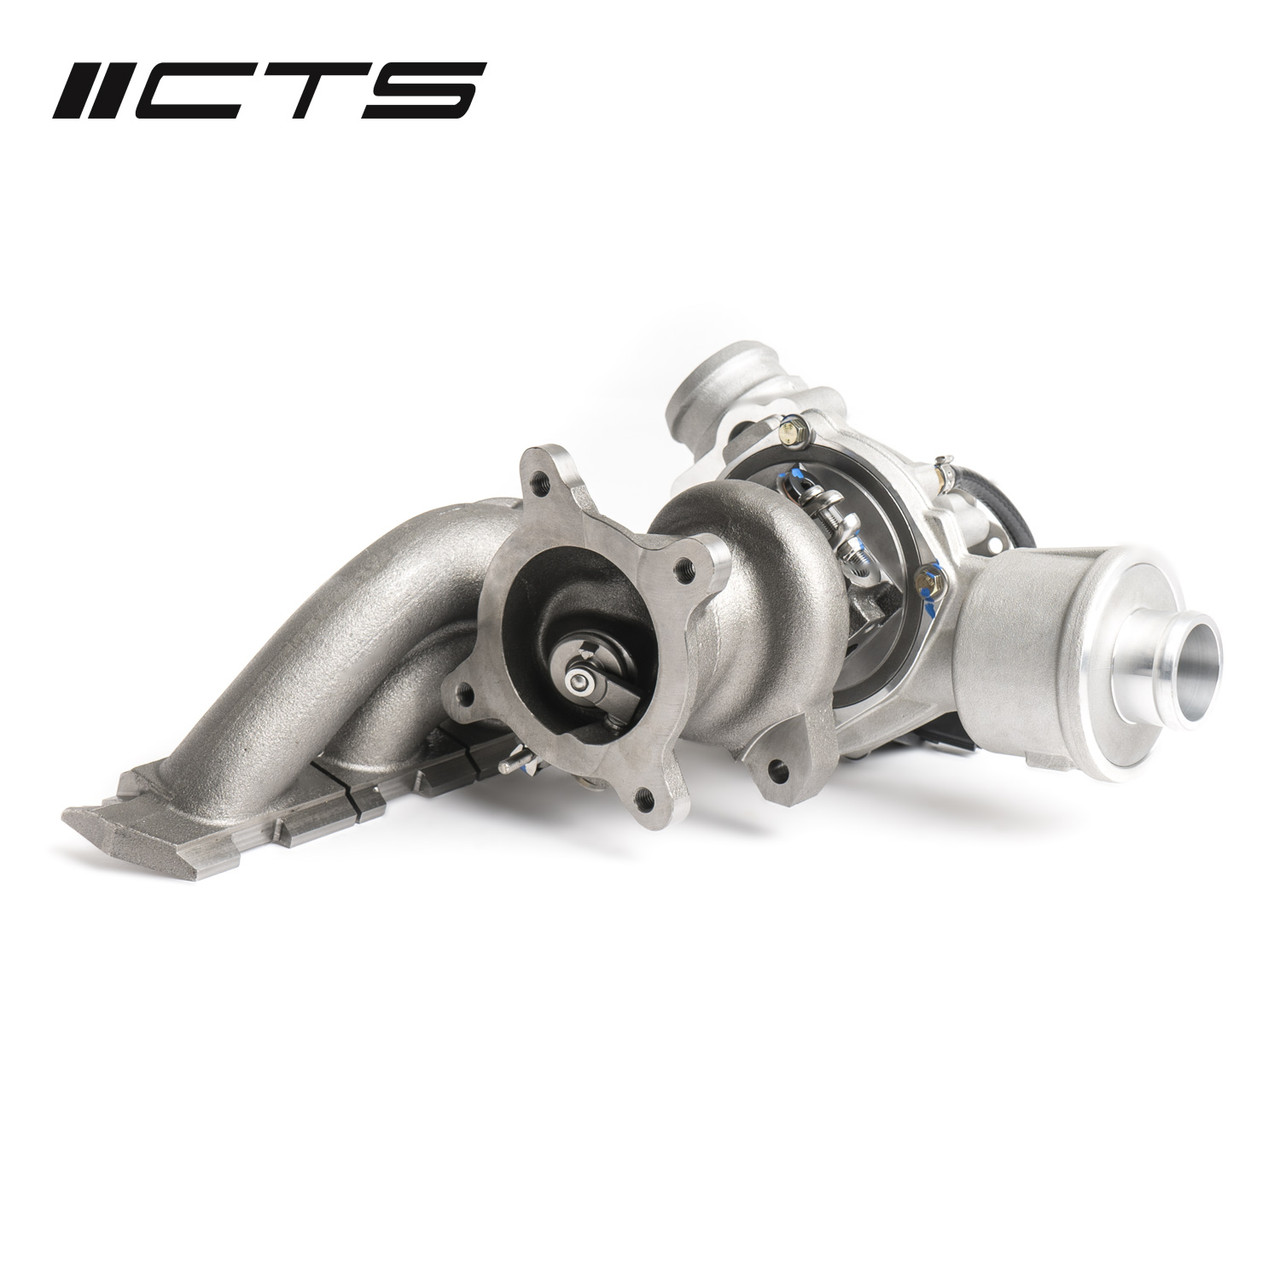 CTS Turbo K04-X Hybrid Turbocharger Upgrade for B7/B8 Audi A4, A5, AllRoad  2.0T,